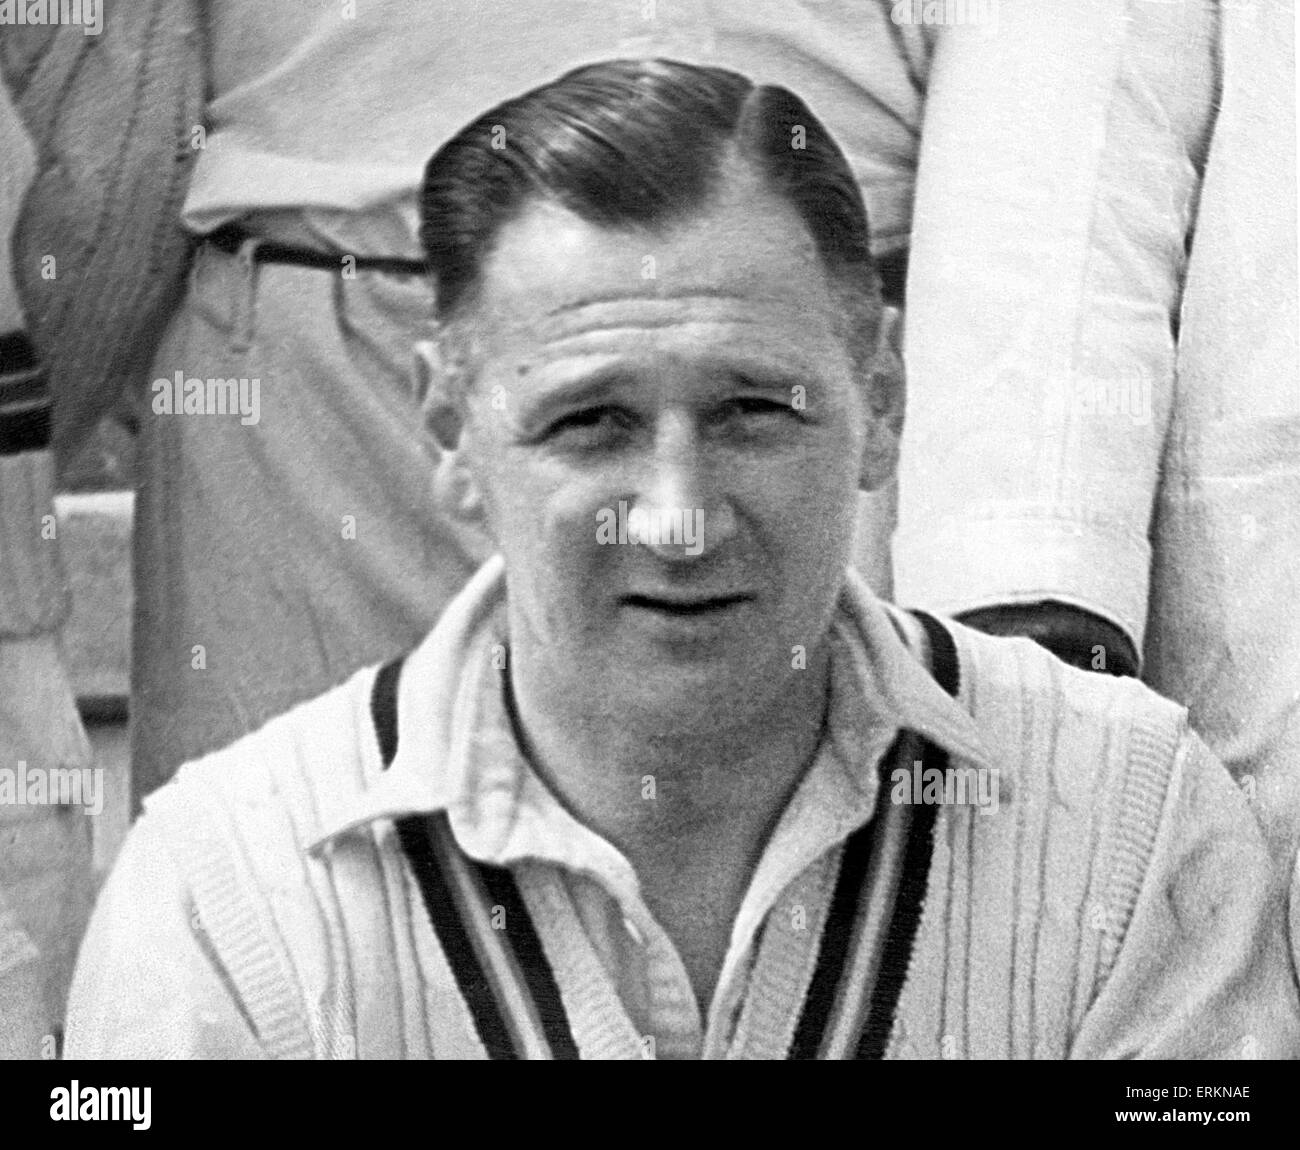 William Eric Houghton (29 June 1910 - 1 May 1996) was an English footballer and manager. Eric Houghton was born in Billingborough Lincolnshire and educated at Donington Grammar School. He signed for Aston Villa as a seventeen-year-old and played in the Vi Stock Photo